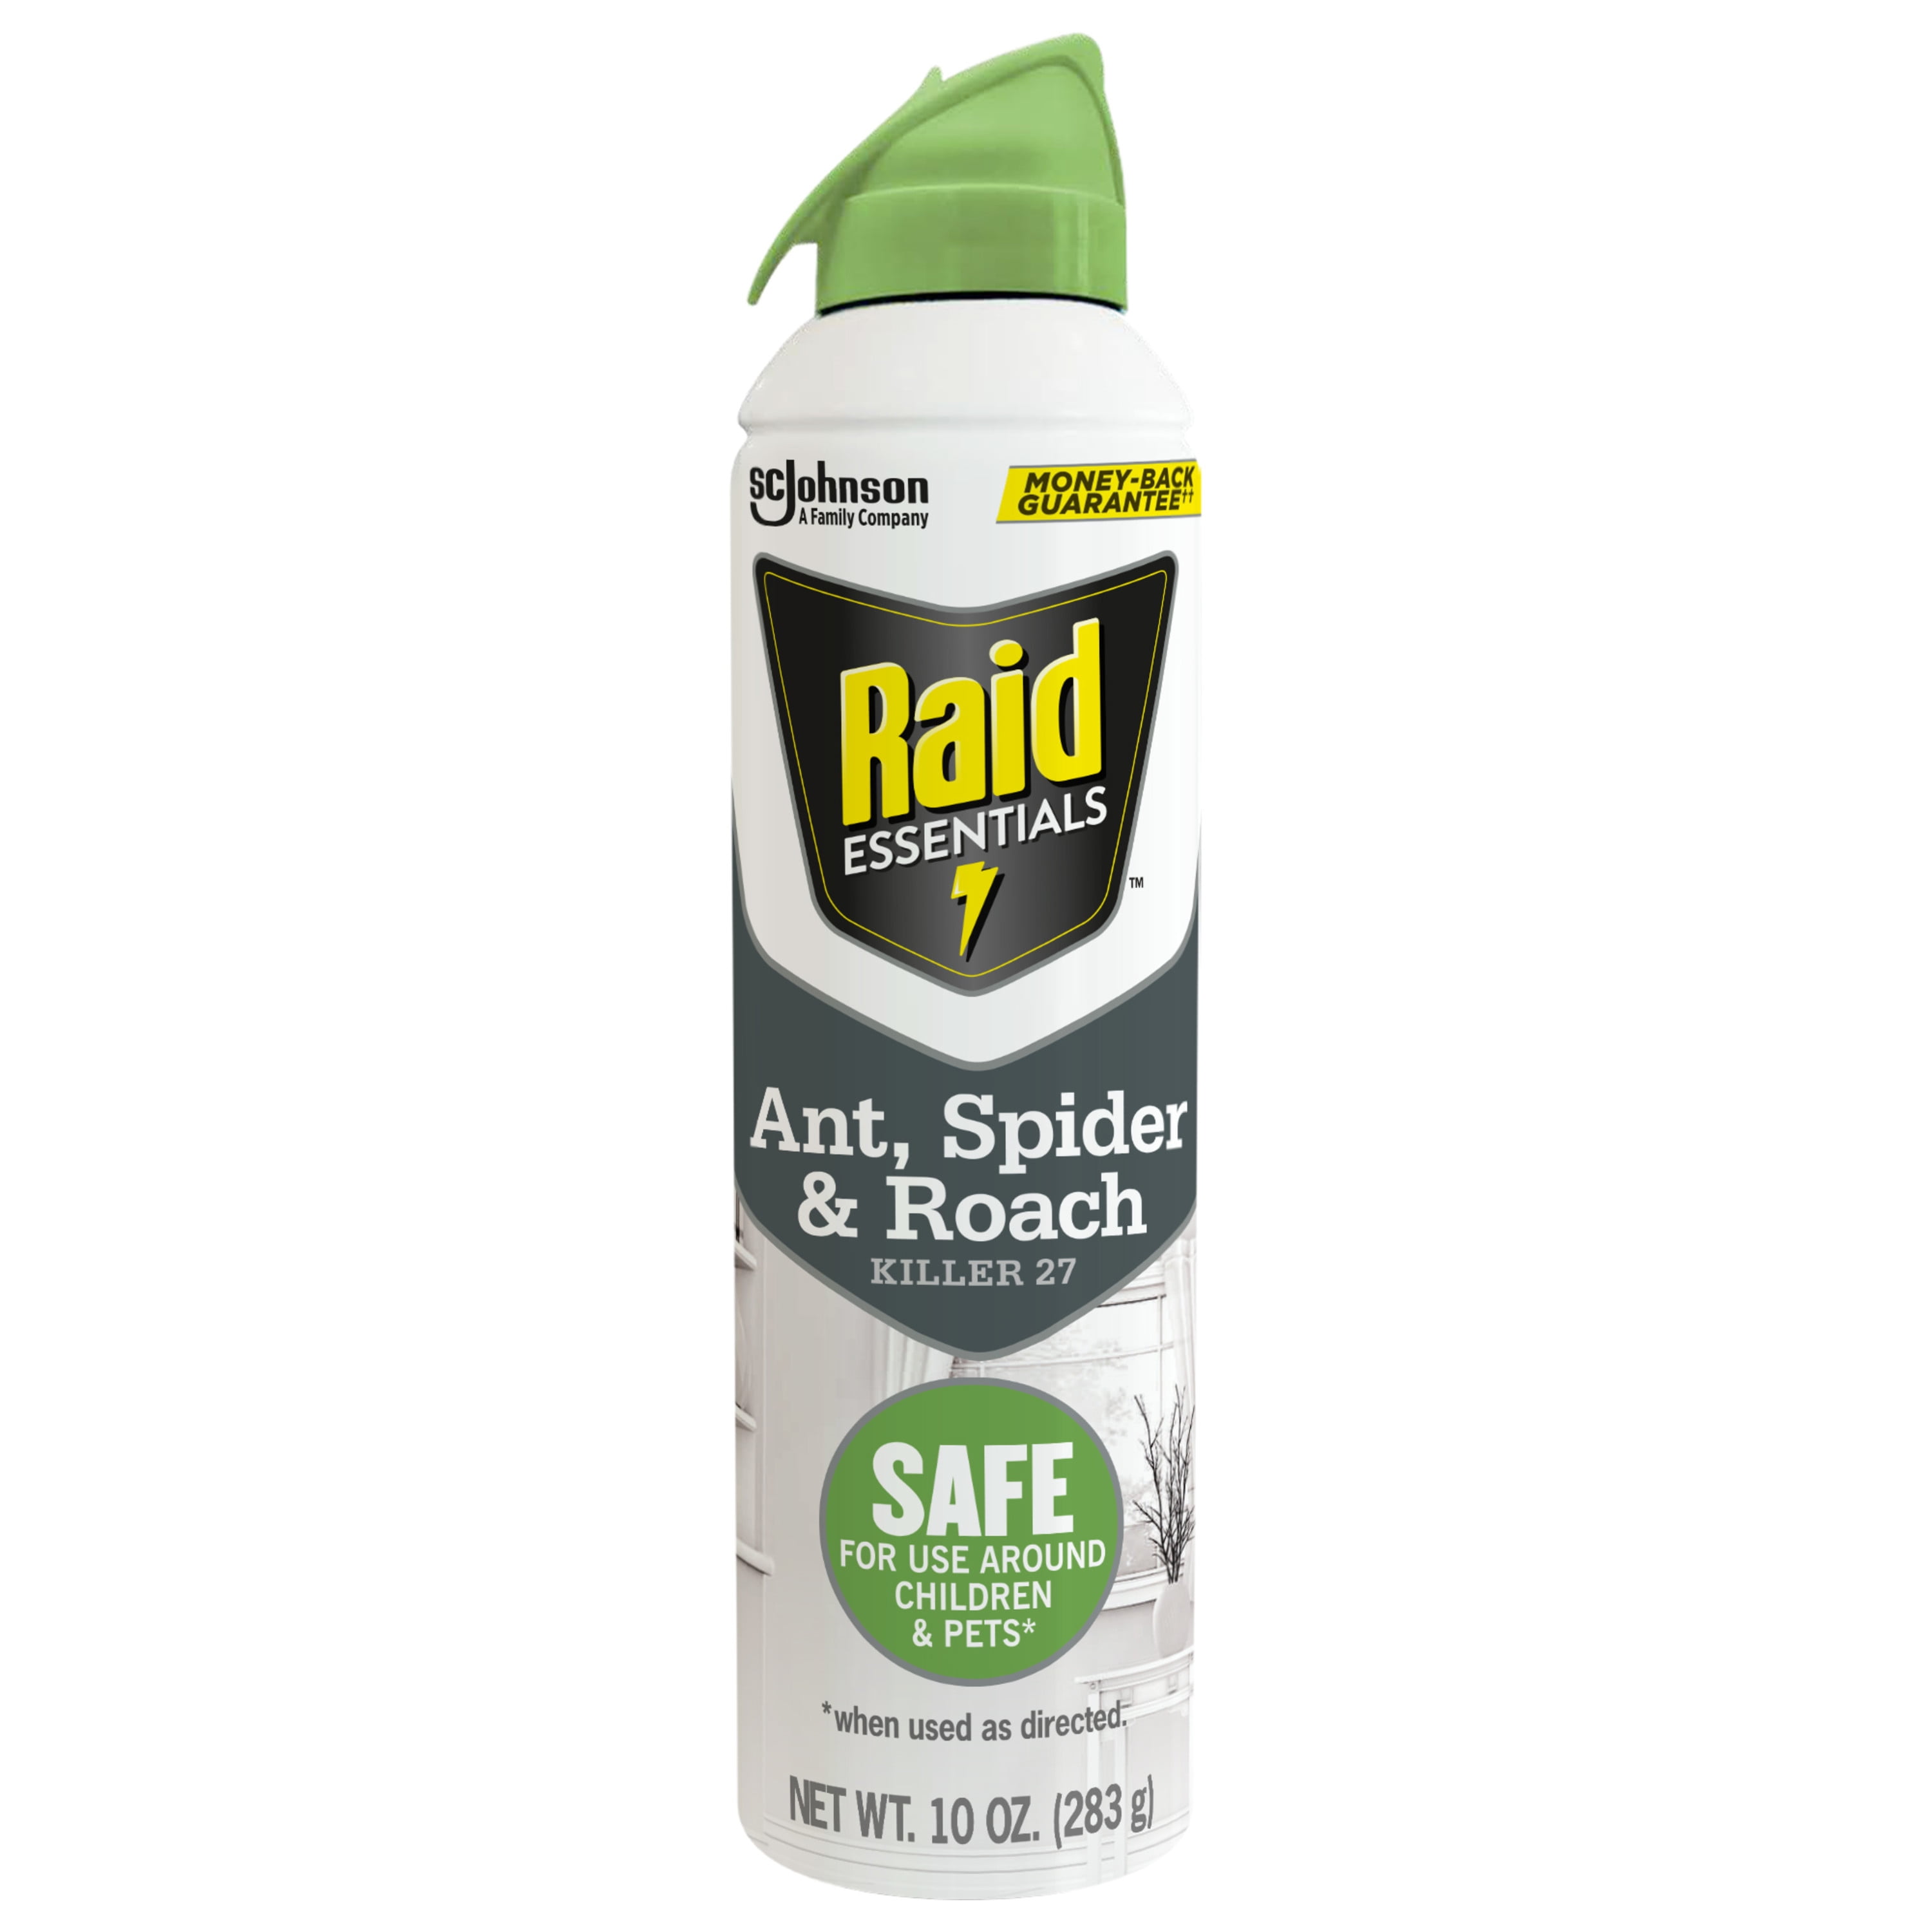 Wondercide - Ant & Roach Aerosol Spray for Kitchen, Home, and Indoor Areas - Ant, Roach, Spider, Flea, Stink Bug Killer with Nat